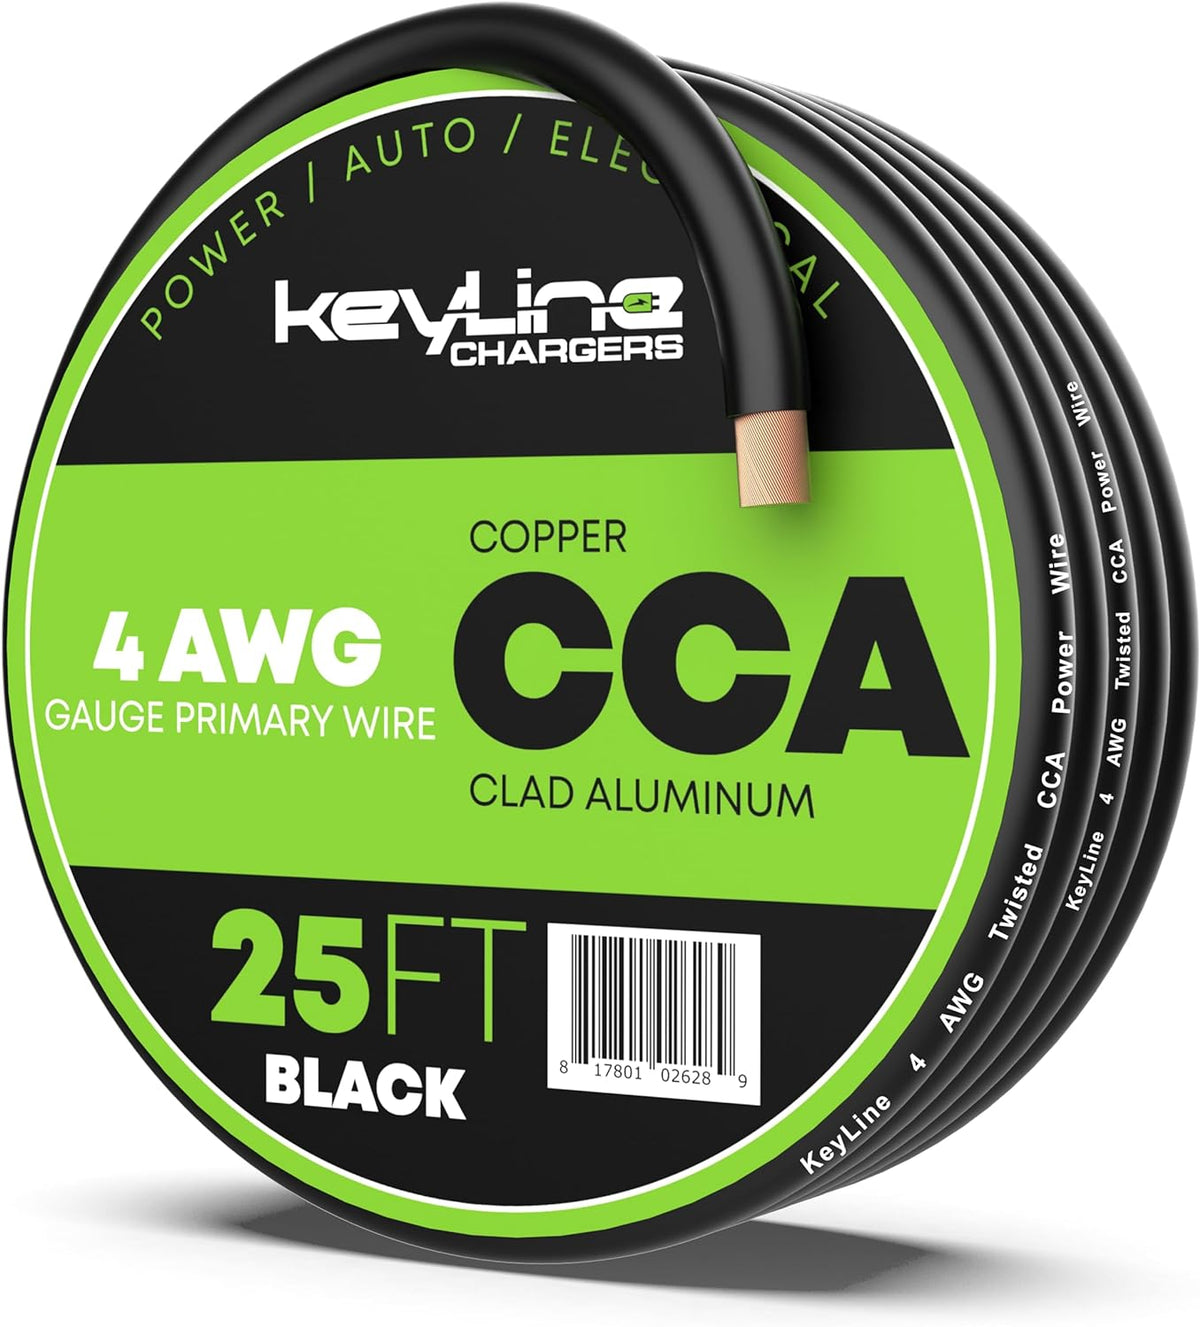 4 Gauge Wire - 25ft Black | 4 Gauge Amp Wire, Battery Cable, Marine Speaker Wire, Solar Cables for RV Trailer, Car Audio Speaker Cable, 4 AWG Automotive Wire Copper Clad Aluminum (CCA)